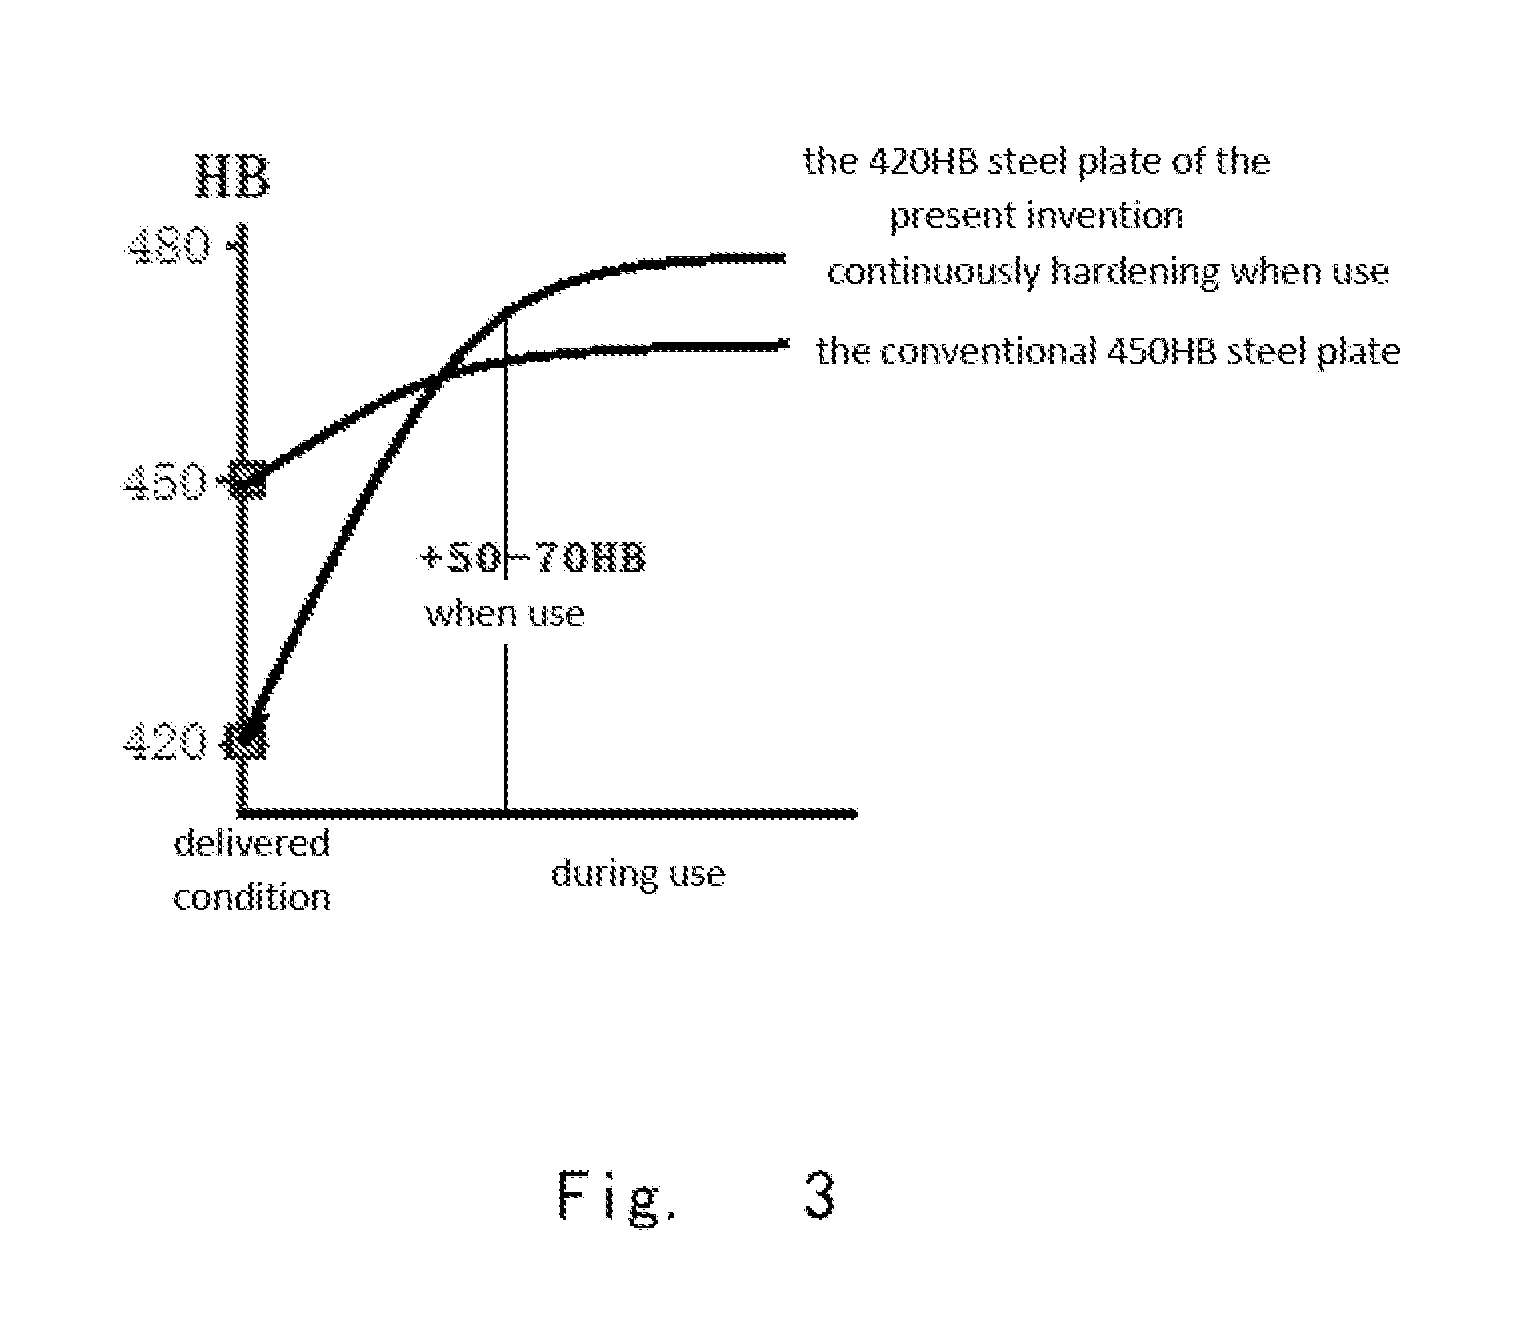 Ultrahigh-strength wear-resistant steel plate and method of manufacturing the same